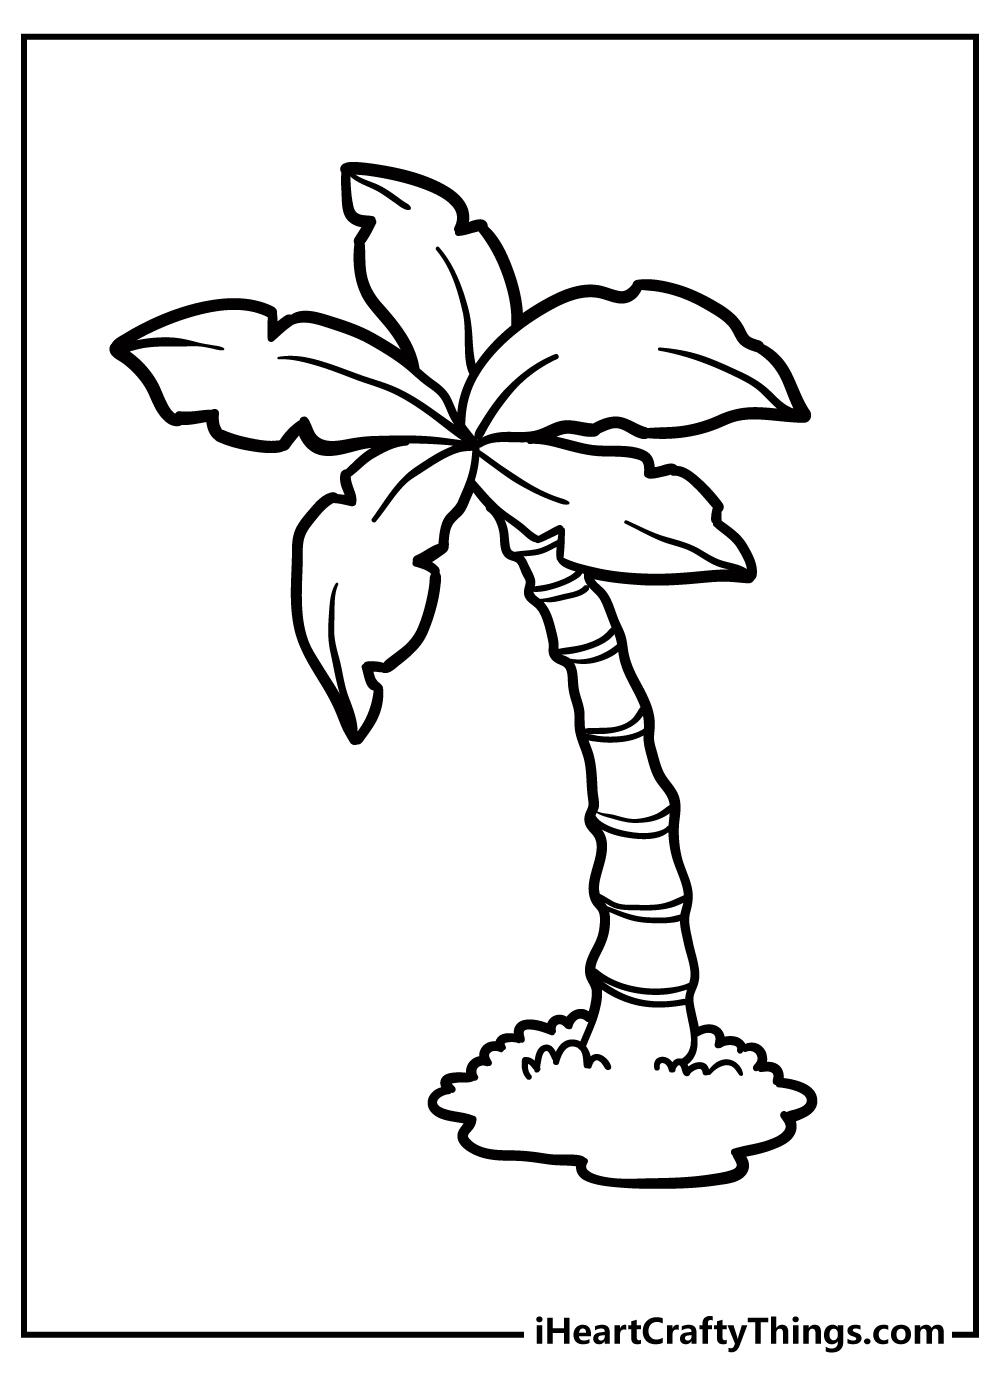 Palm Tree Coloring Book for adults free download